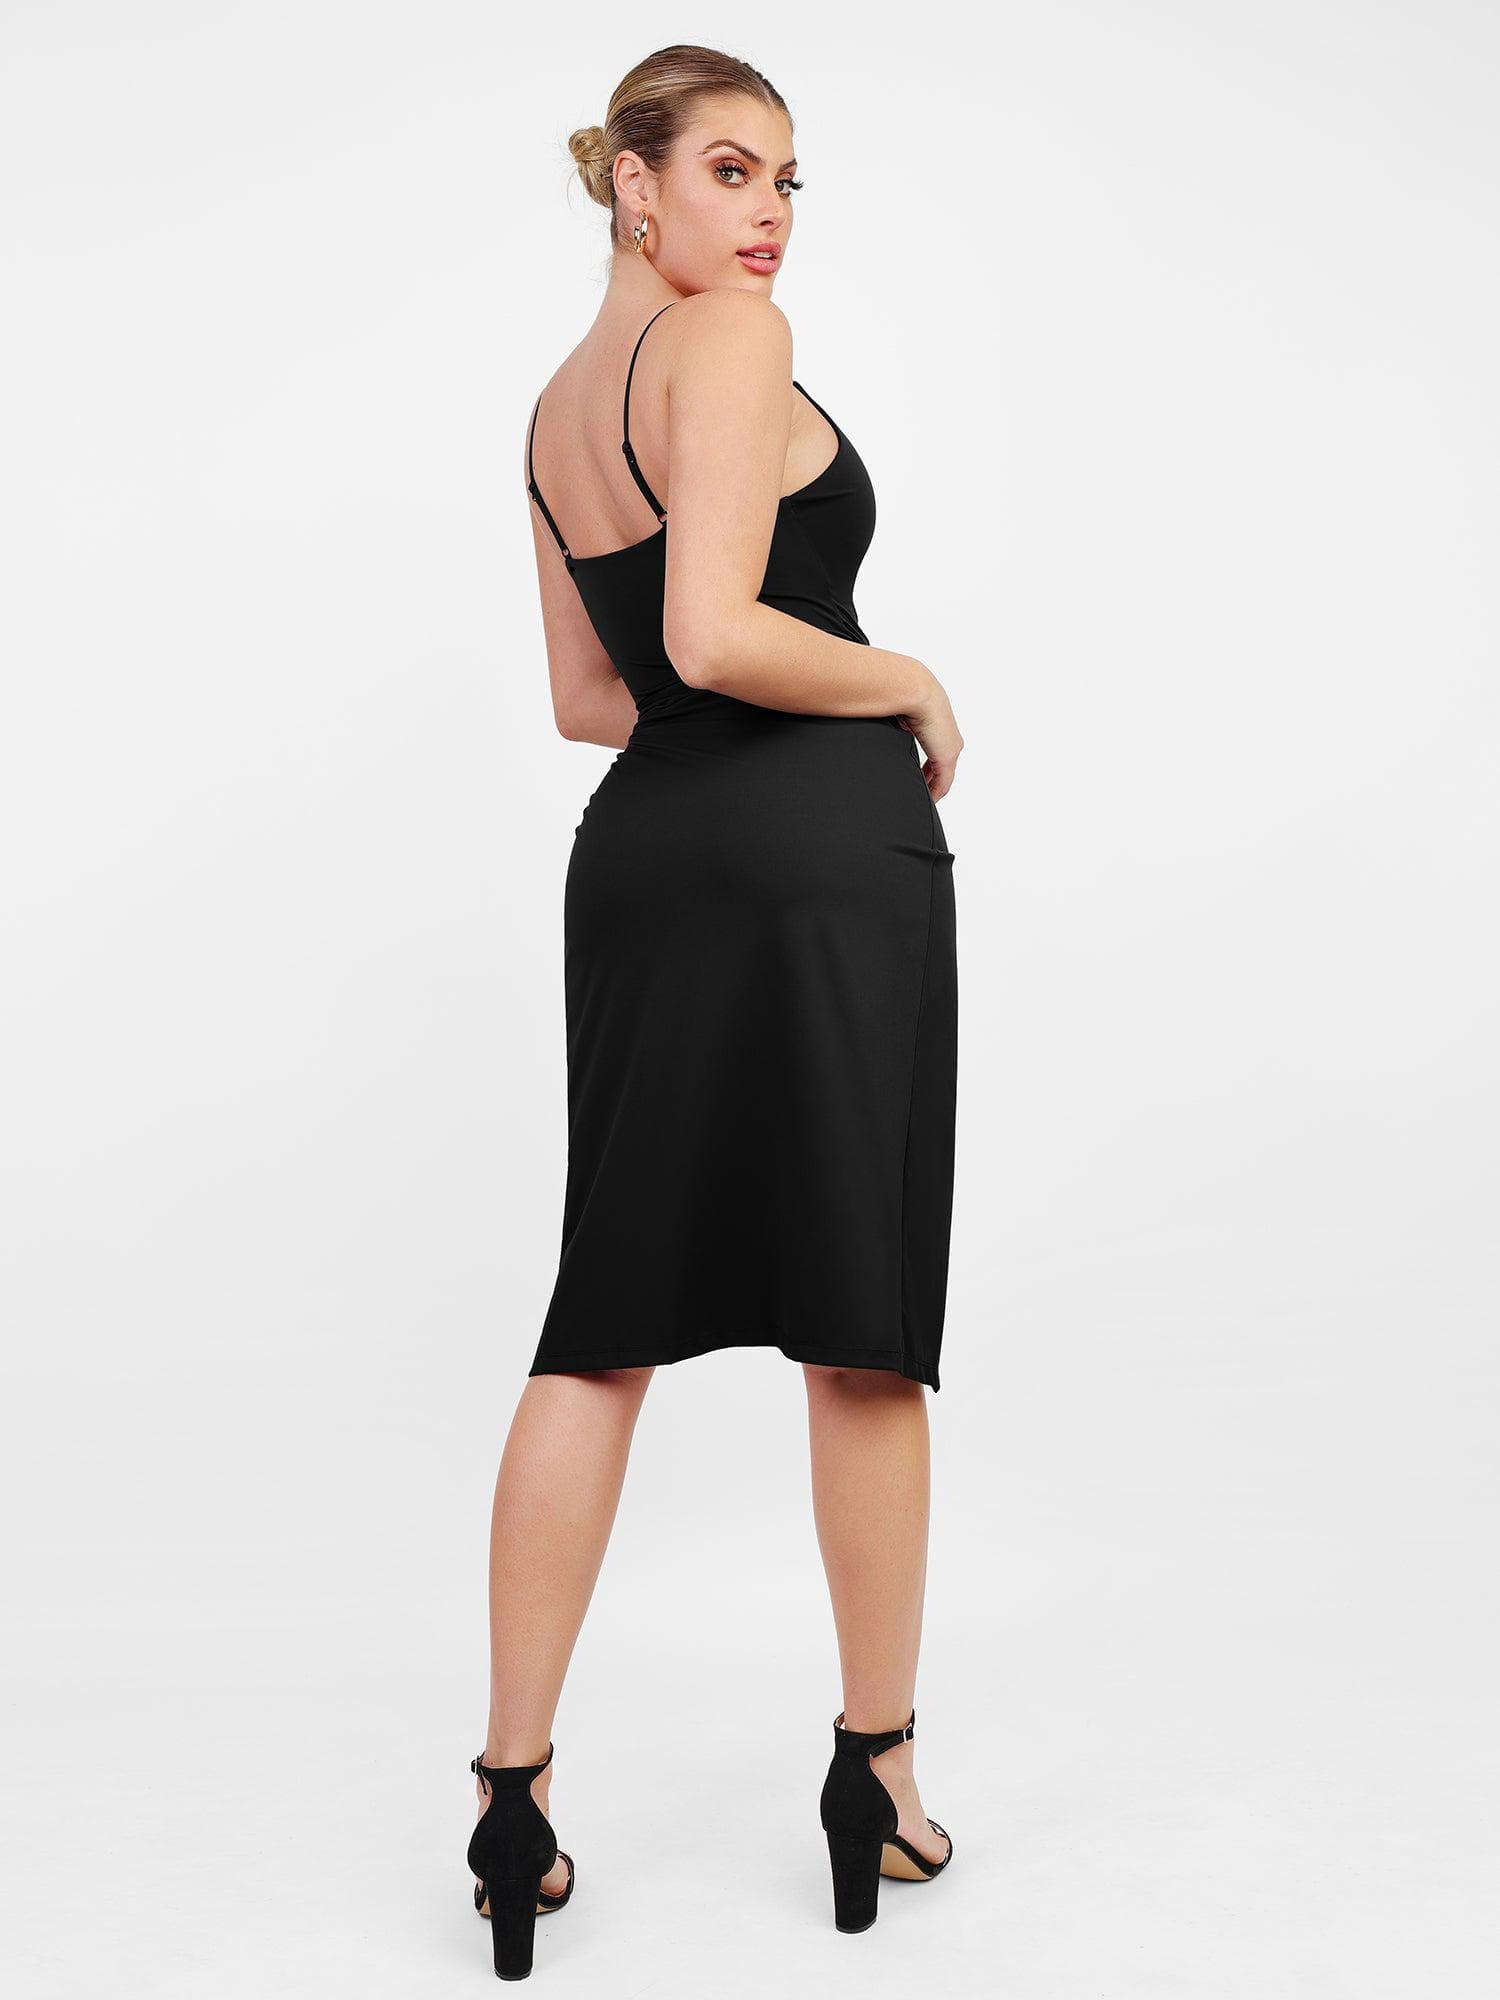 Popilush Shaper Faux Leather Skirts with Built in Shapewear High